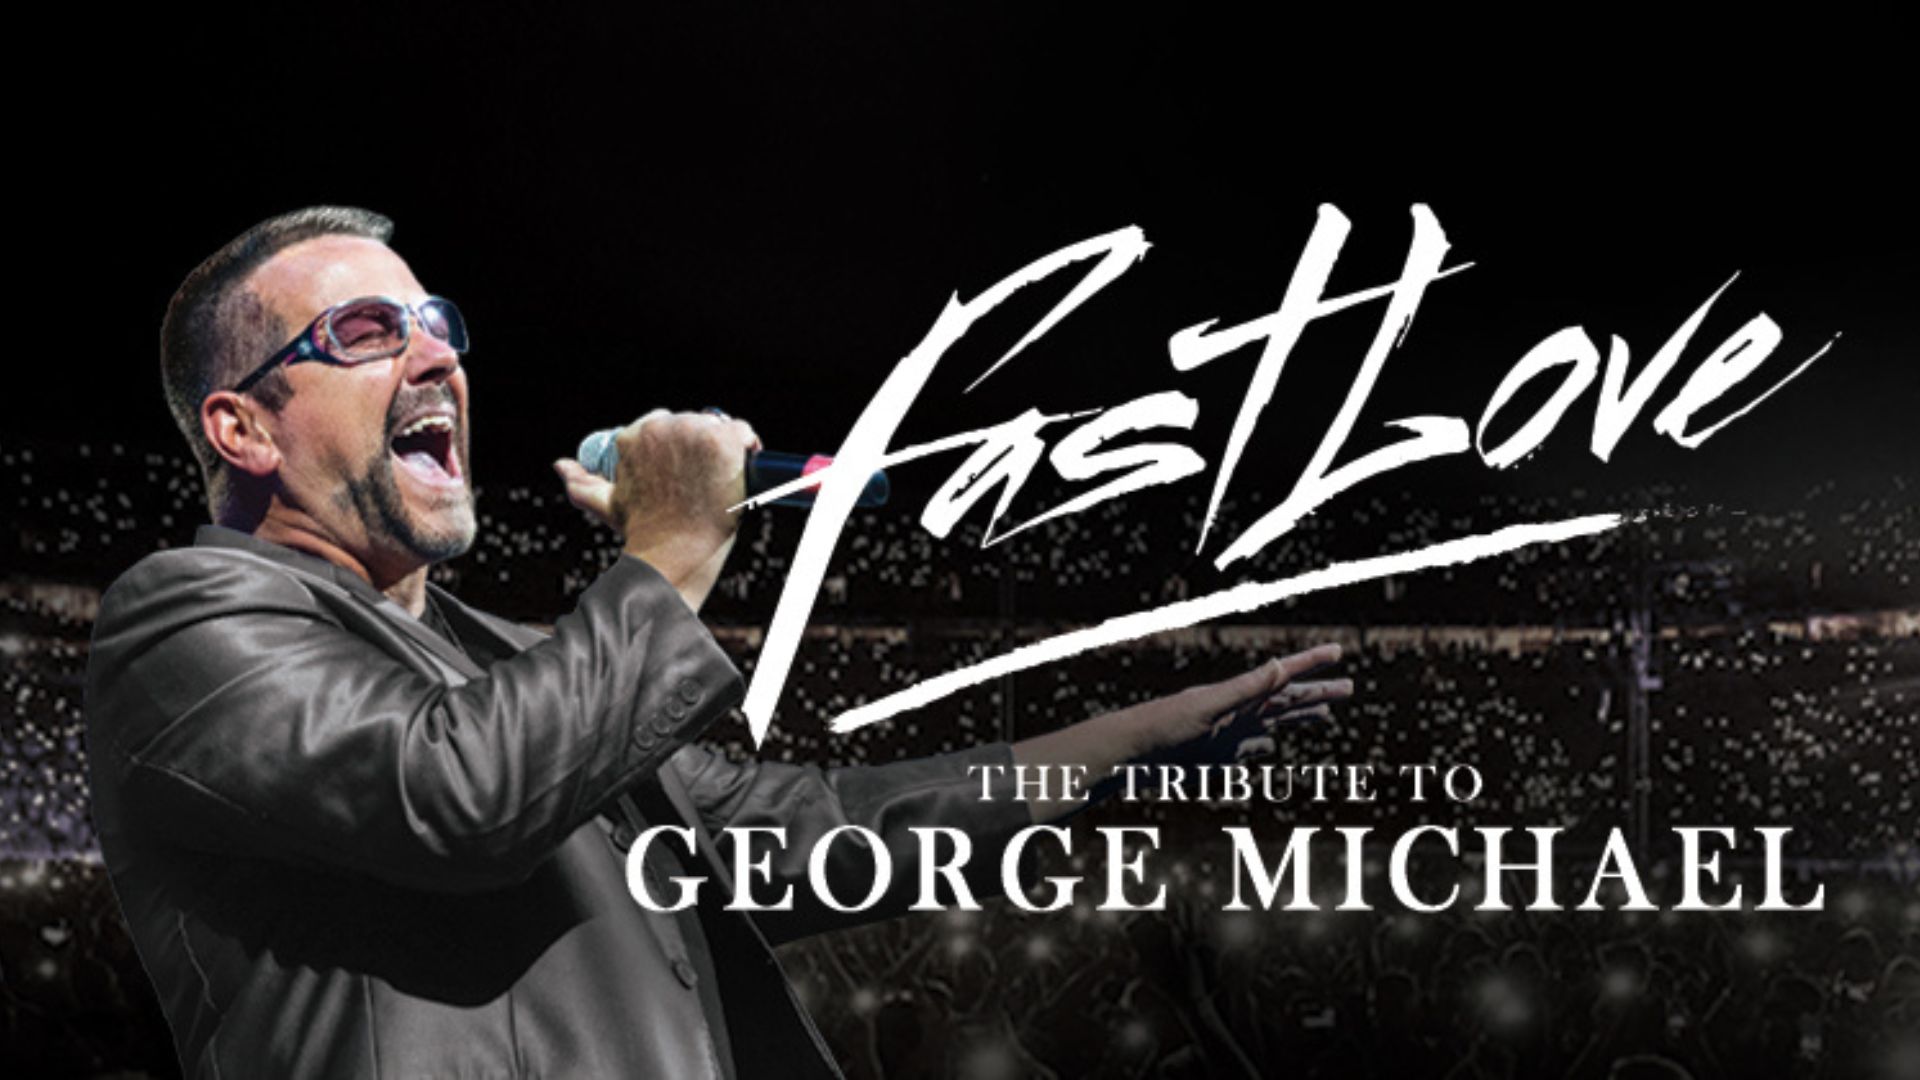 Fastlove- A Tribute to George Michael